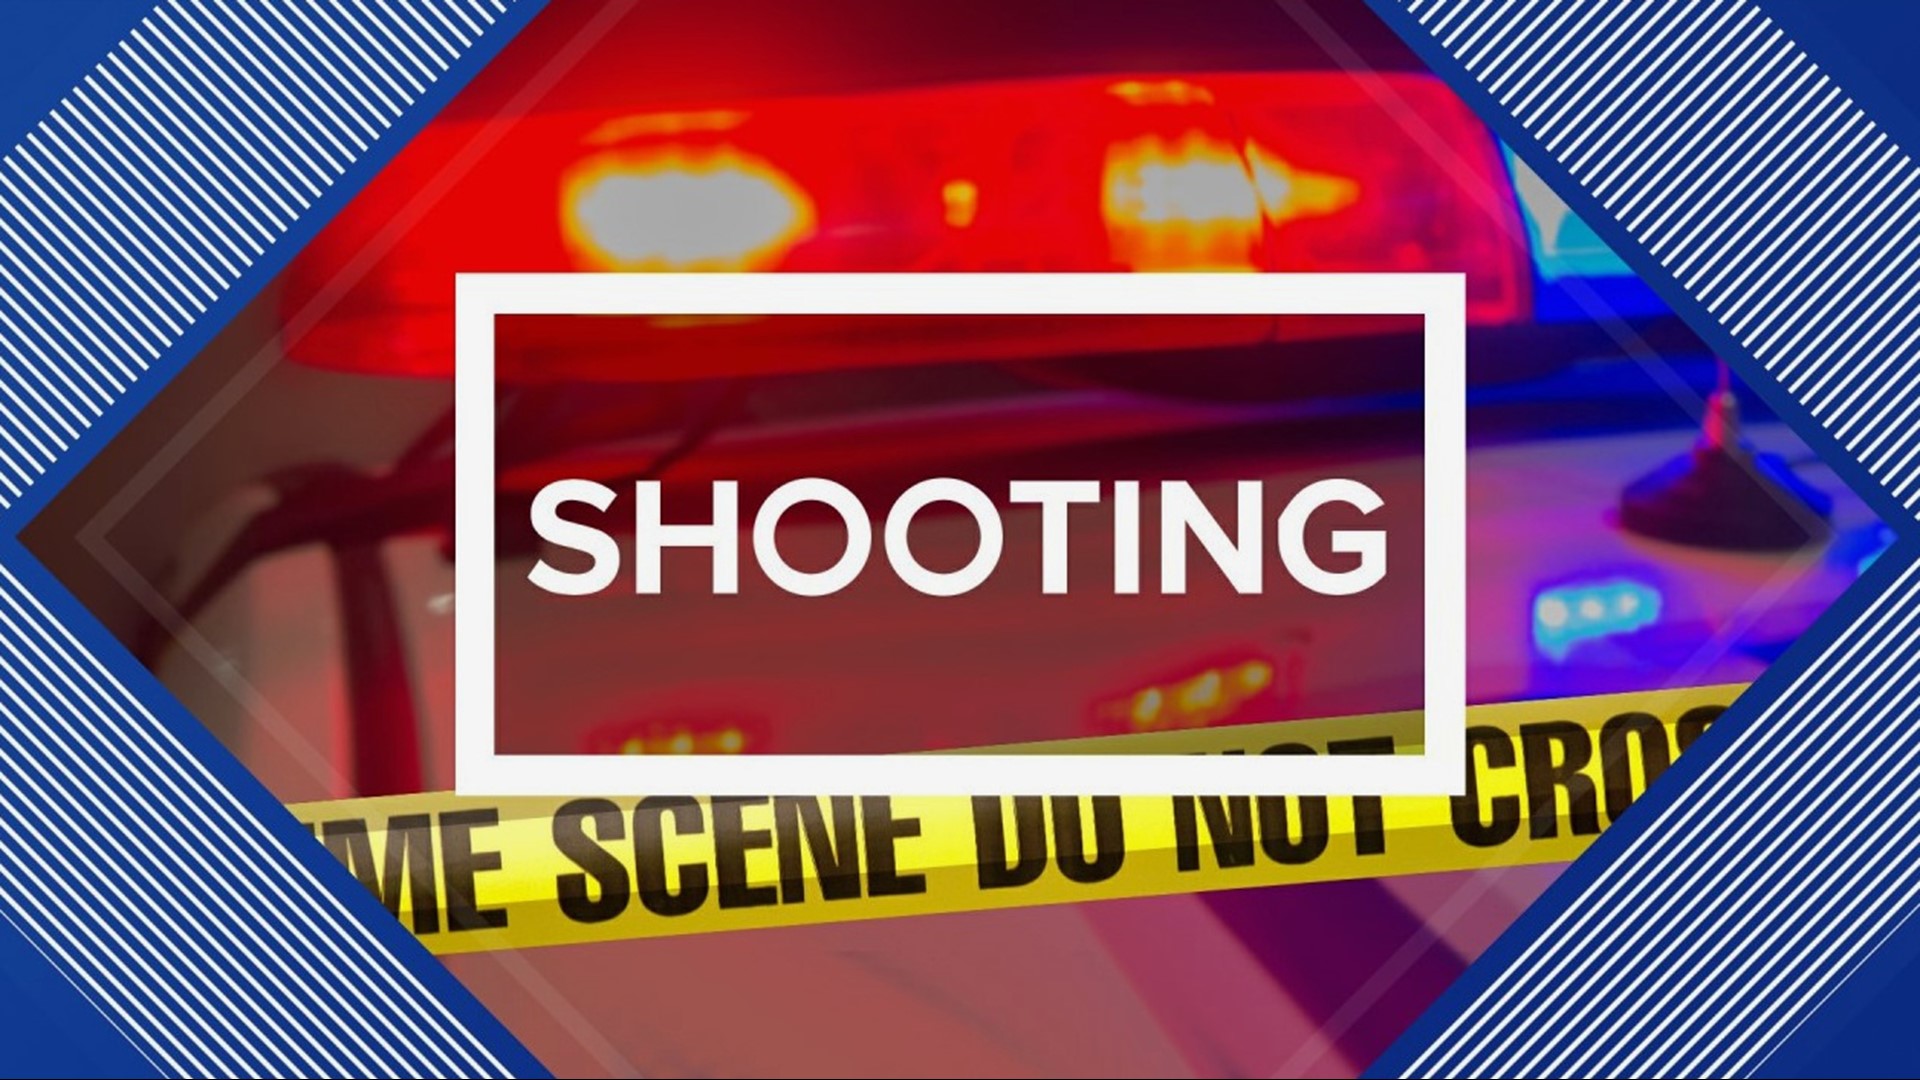 The shooting happened just after 3 p.m. along College Avenue in the borough.